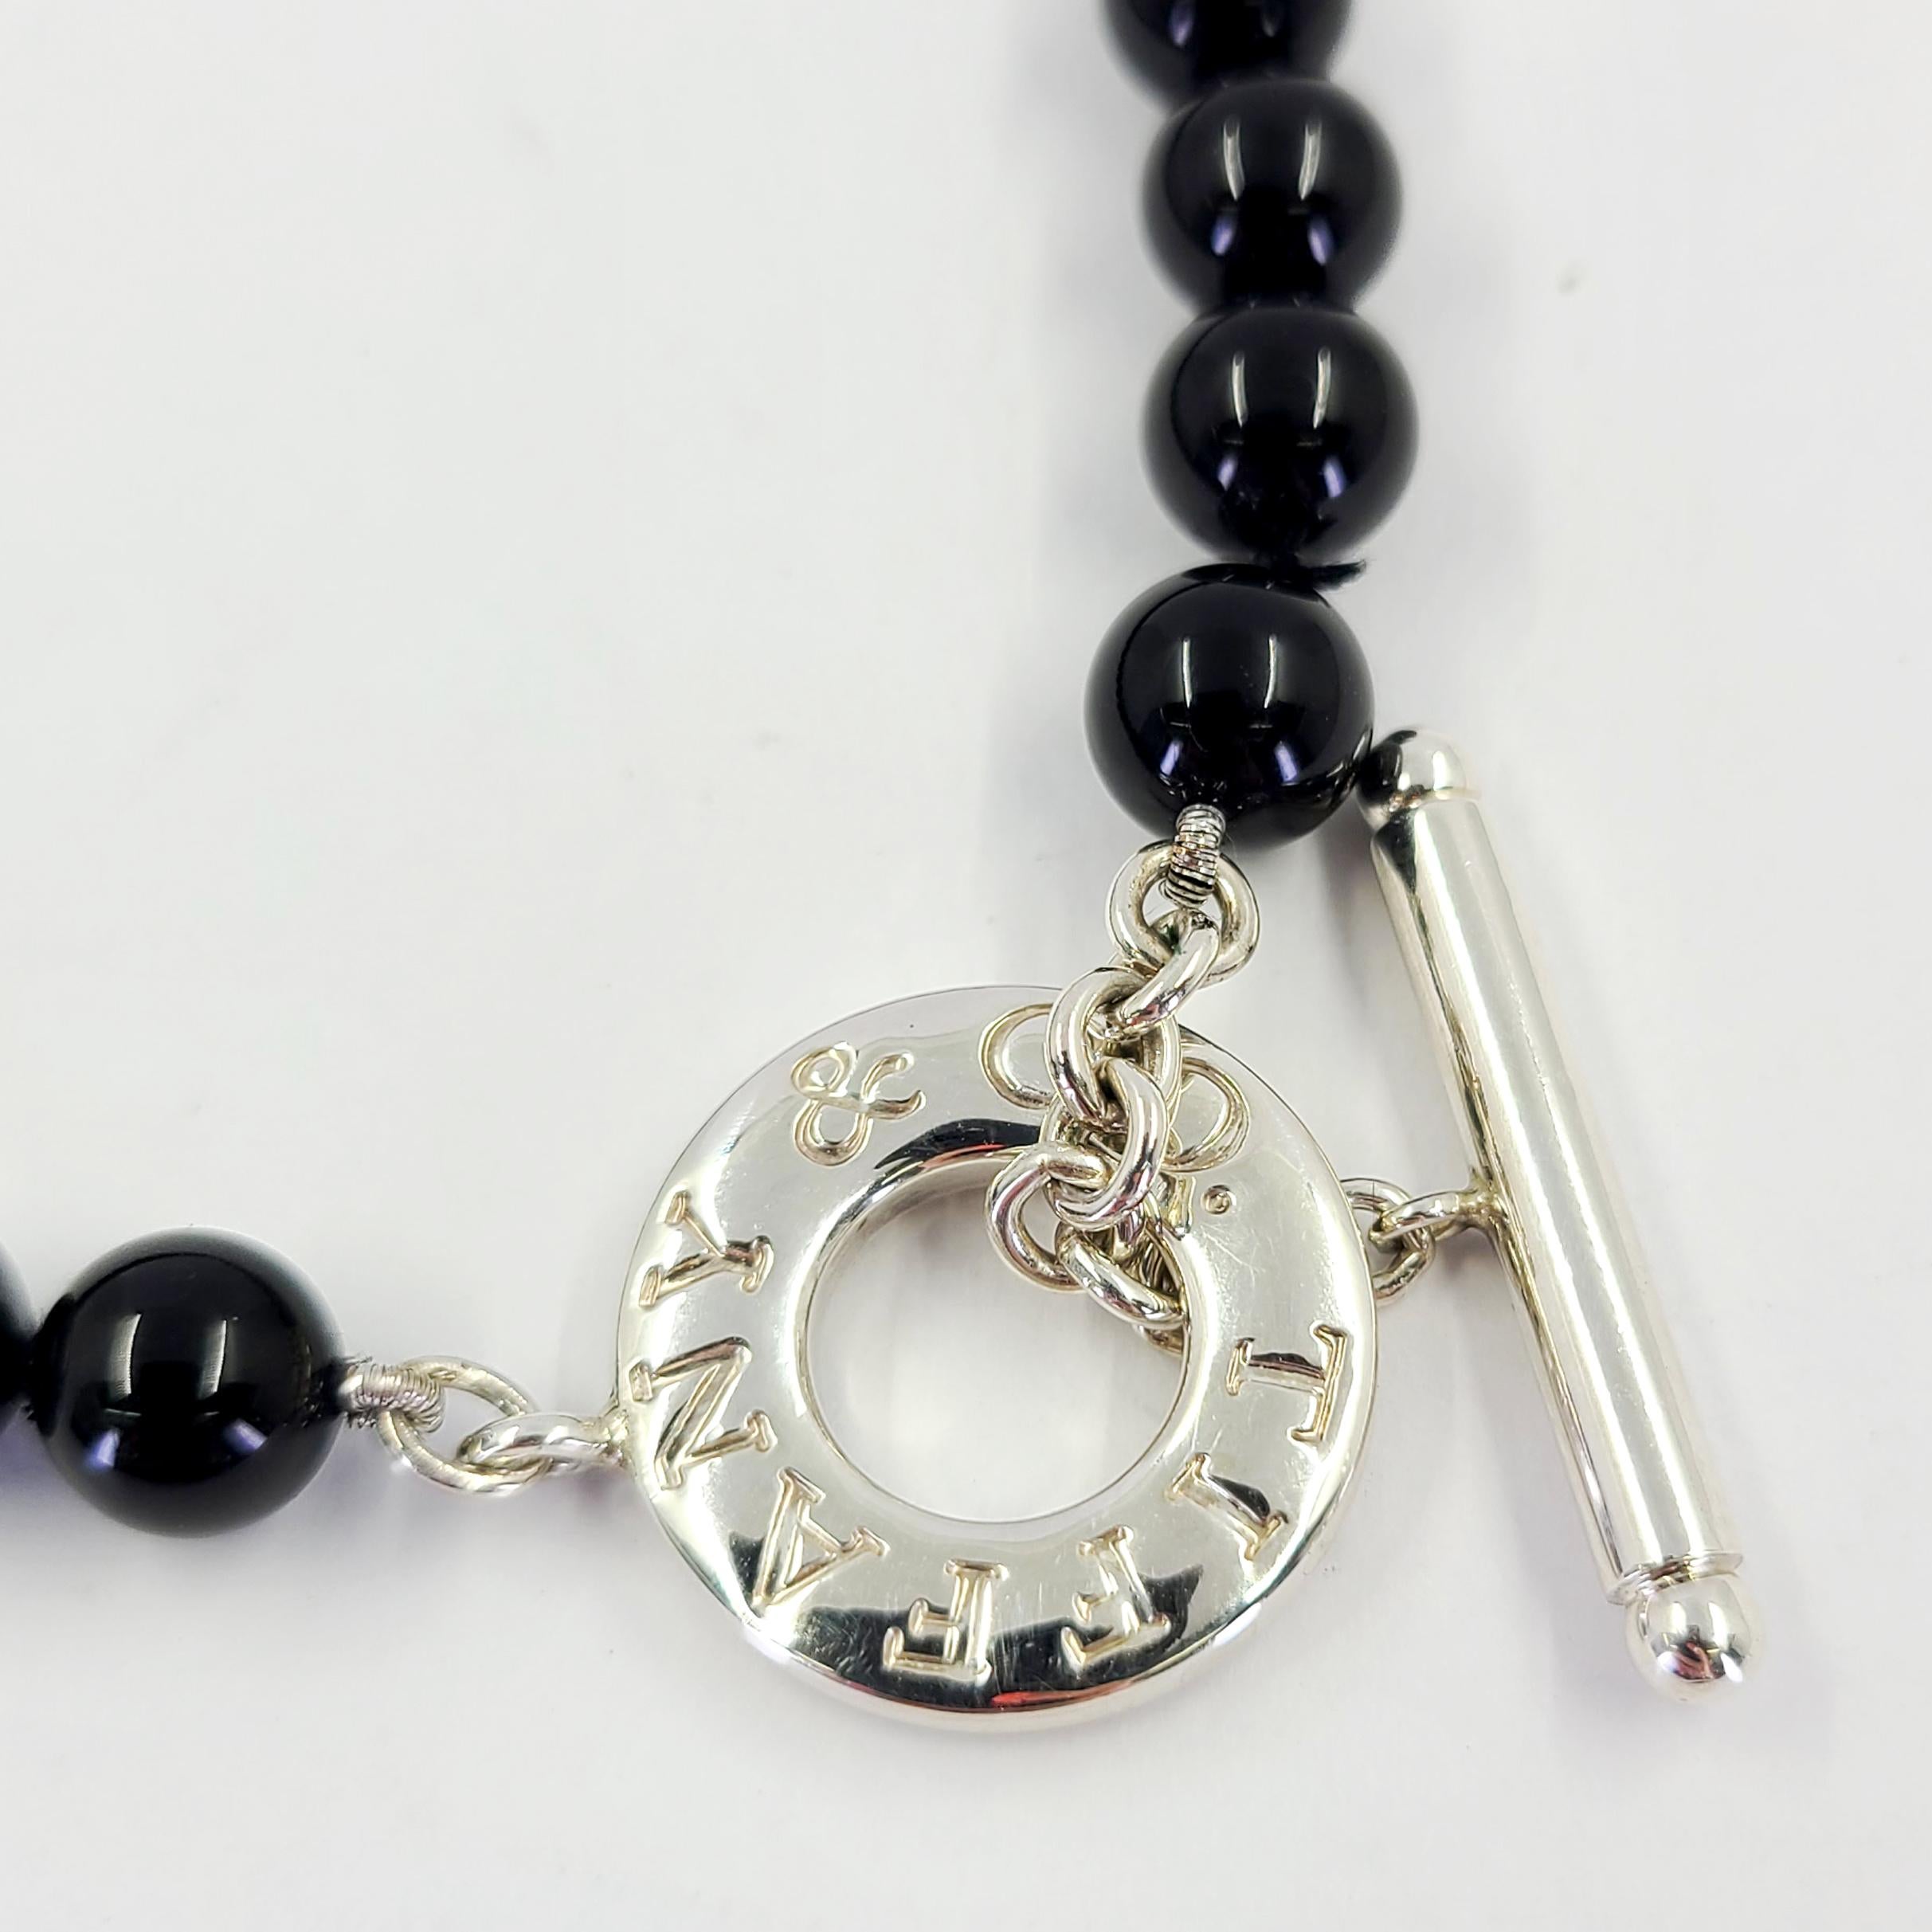 Round Cut Tiffany & Co. Sterling Silver and Onyx Bead Necklace